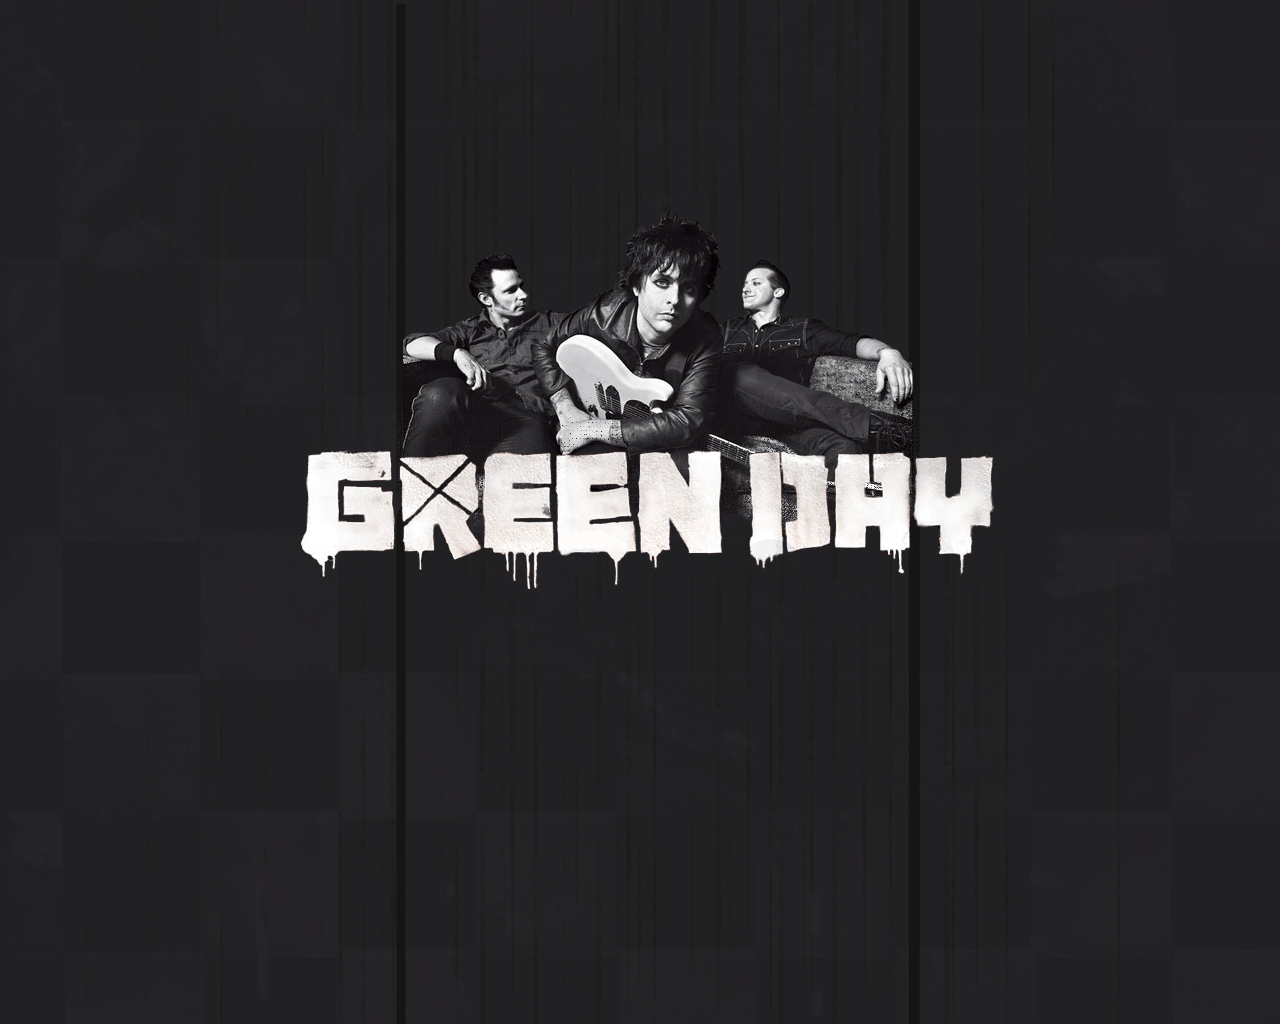 Wallpapers For > Green Day Wallpapers Live